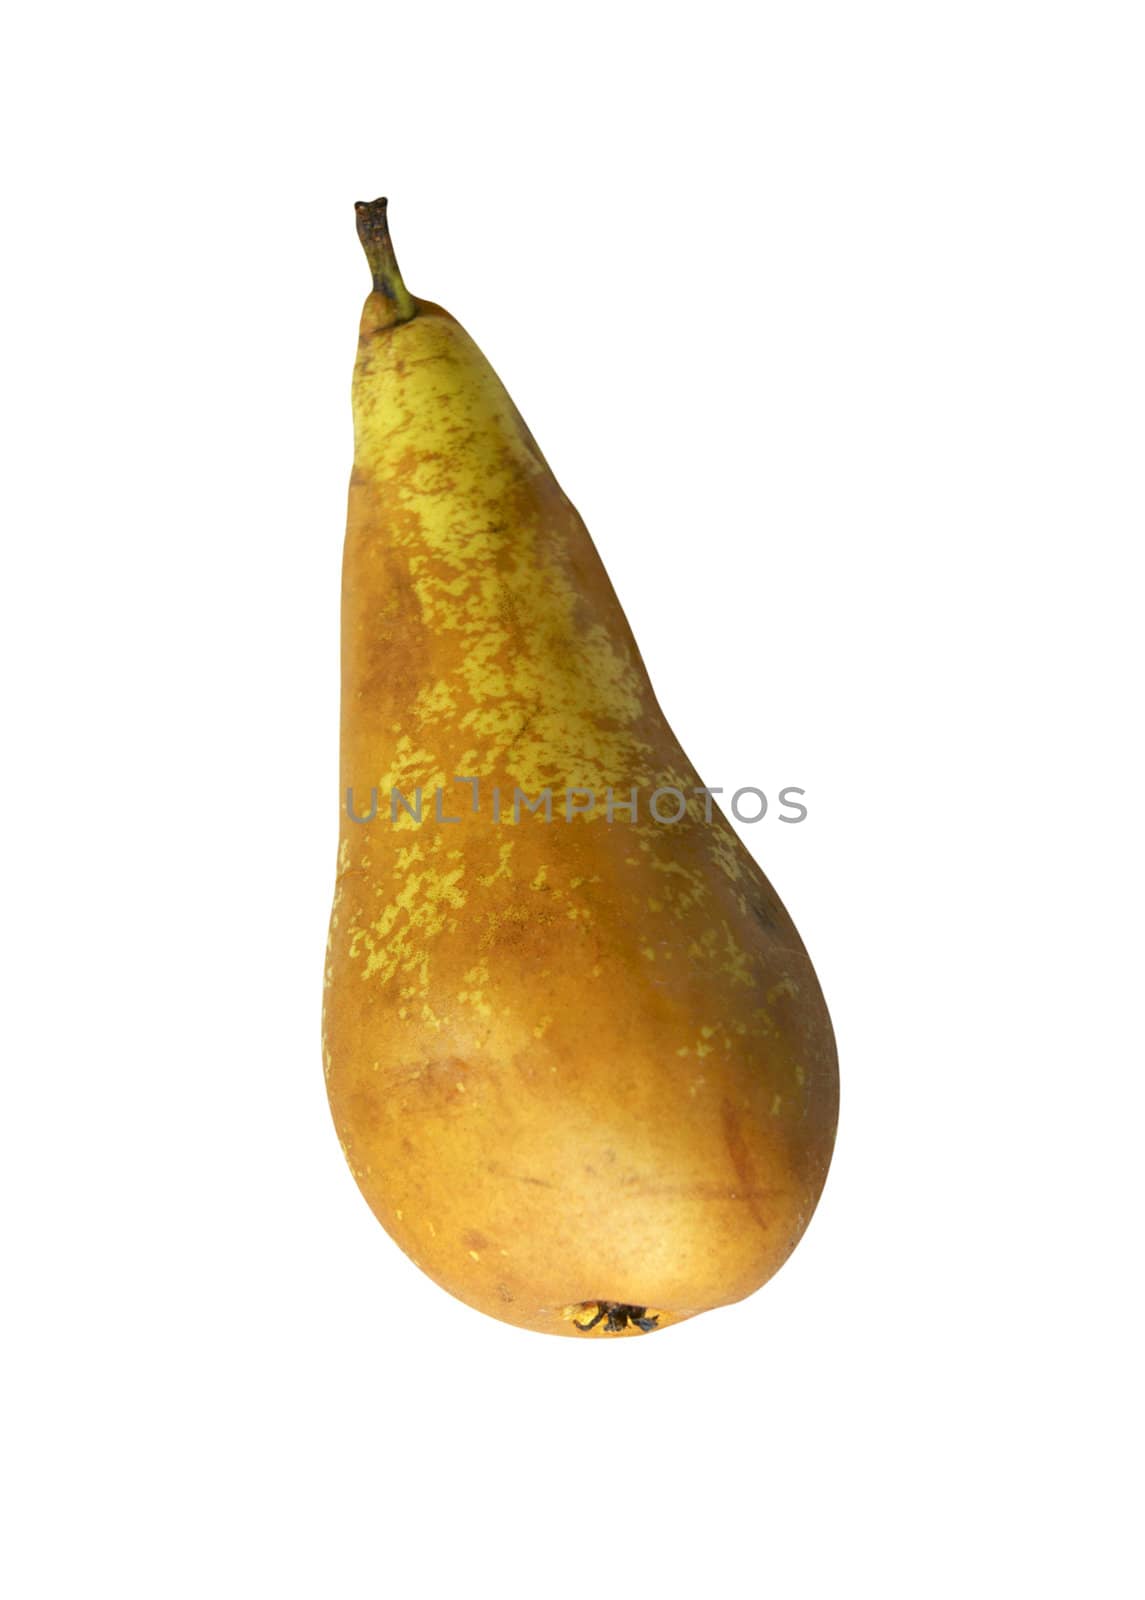 Ripe pear on white background by cobol1964